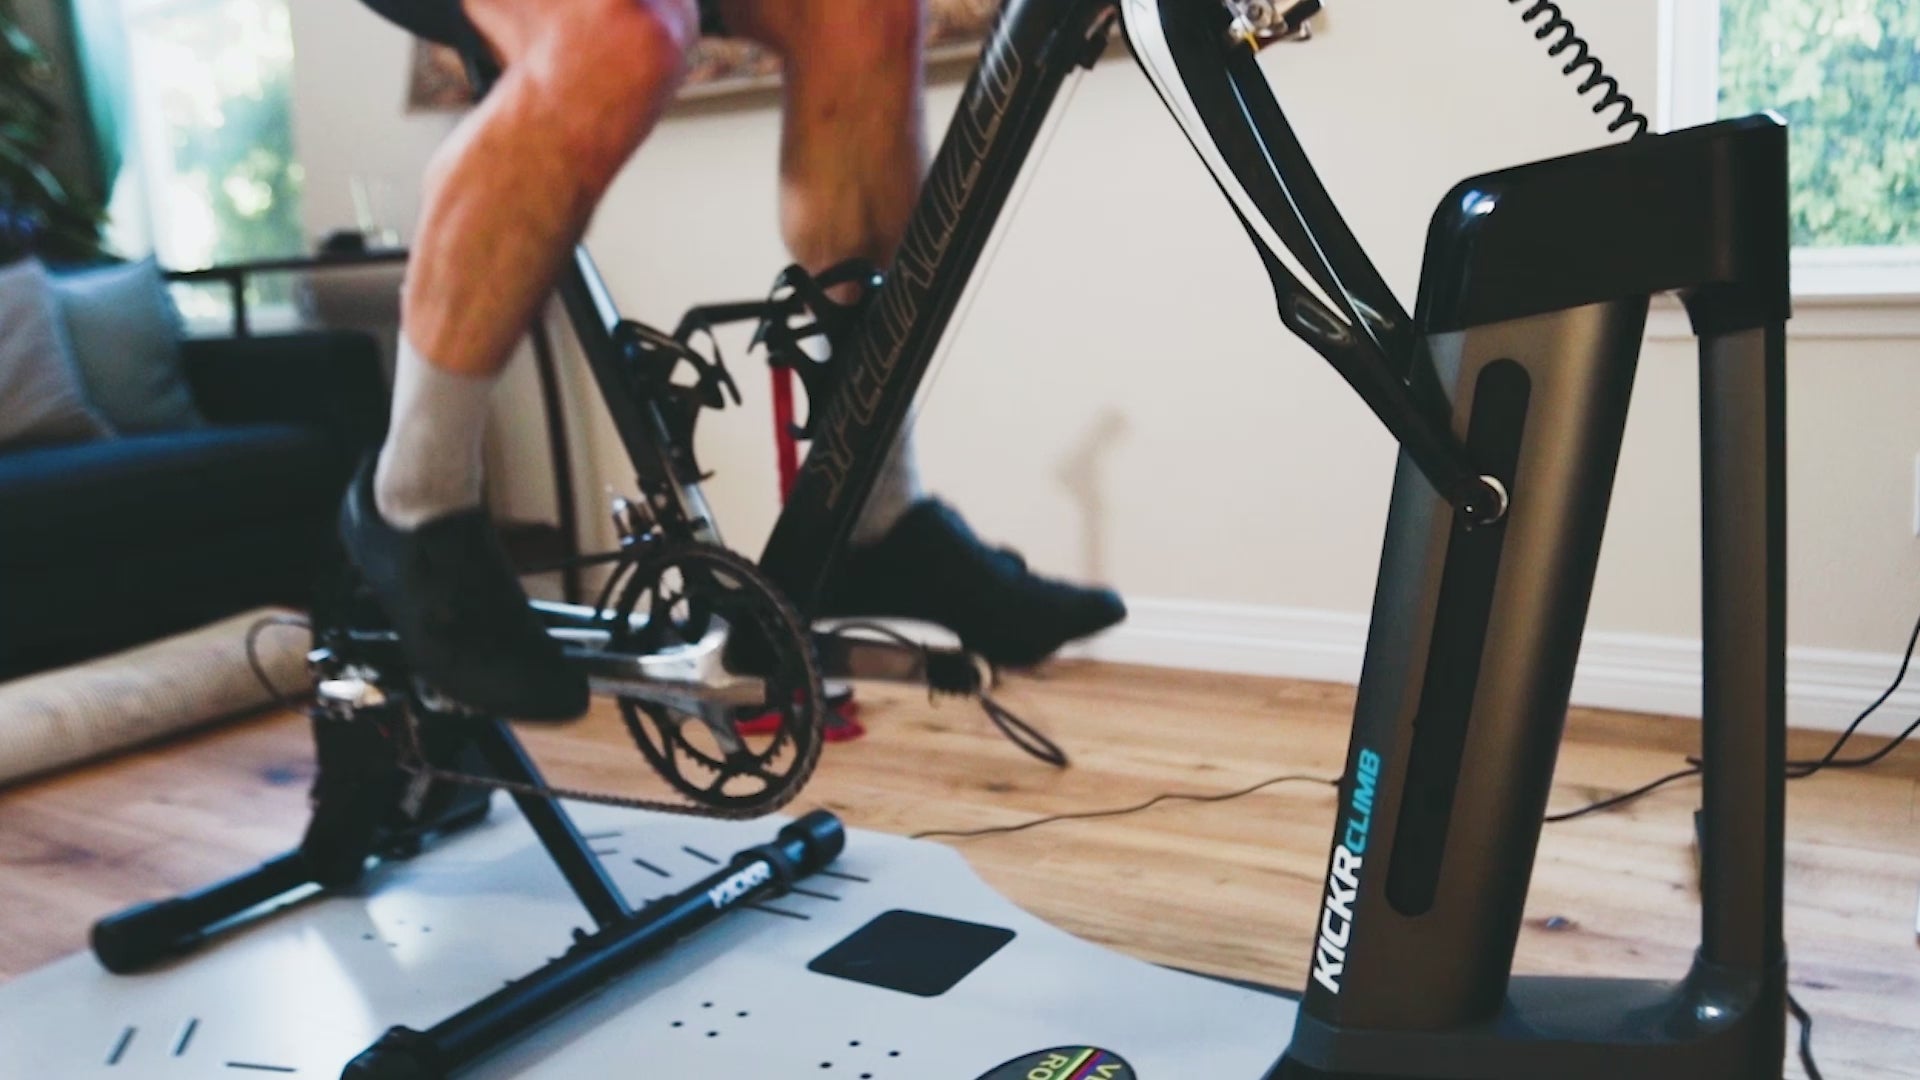 Indoor cycling on a Specialized bike using the Kickr Core and Kickr Climb on top of the Velocity Rocker rocker plate. Vertical motion of the Kickr Climb shown.